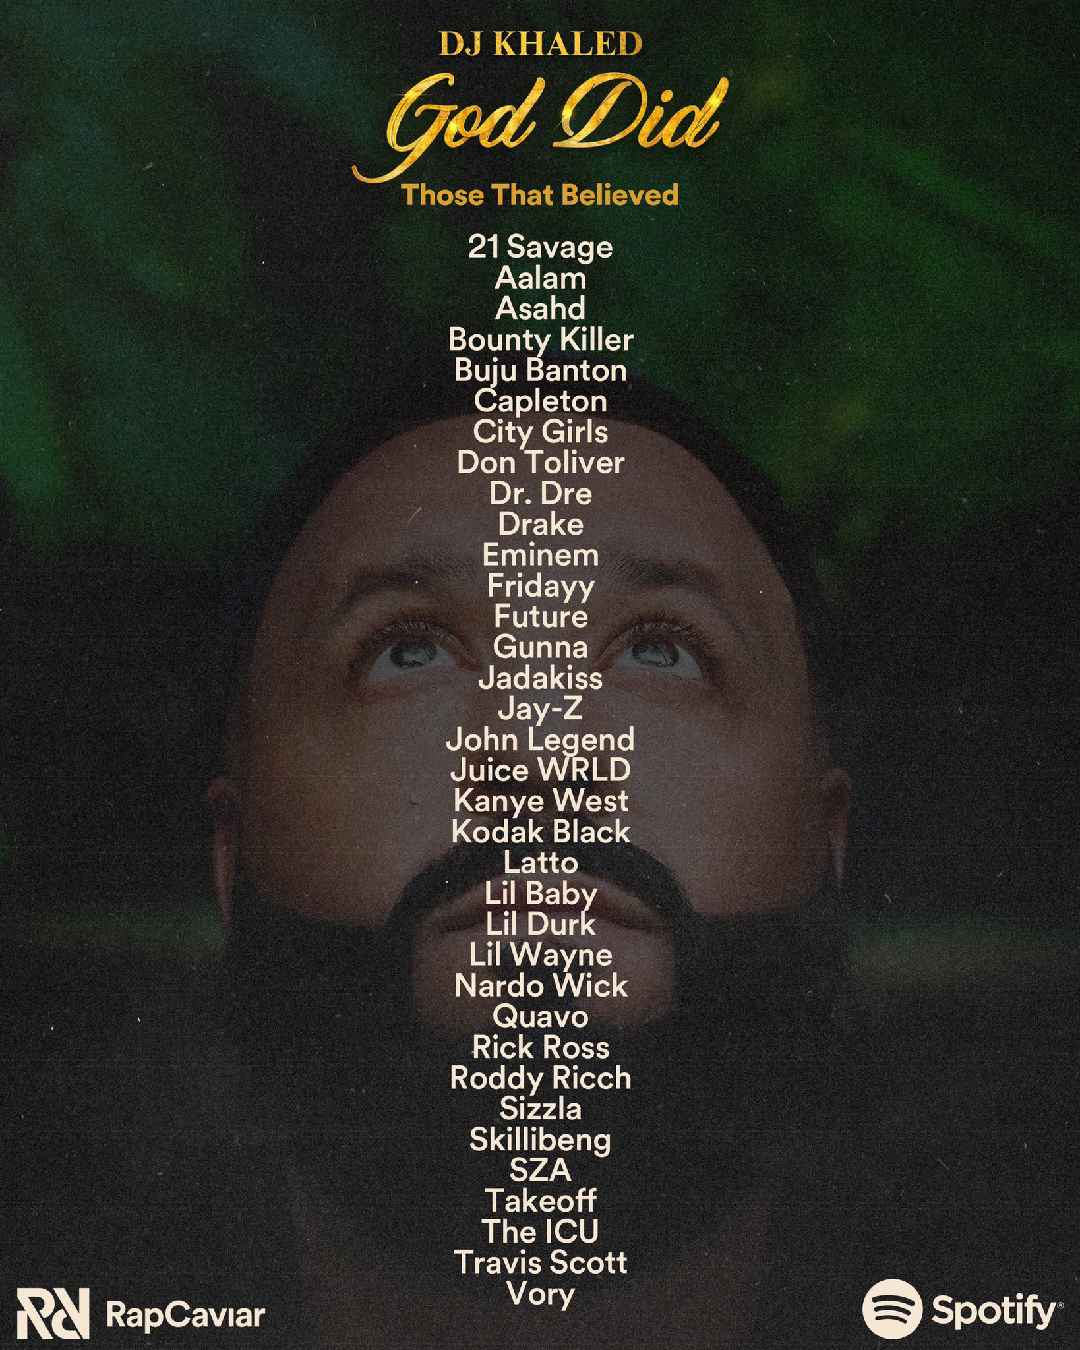 DJ Khaled Unveils God Did's Cover Art and Official Tracklist